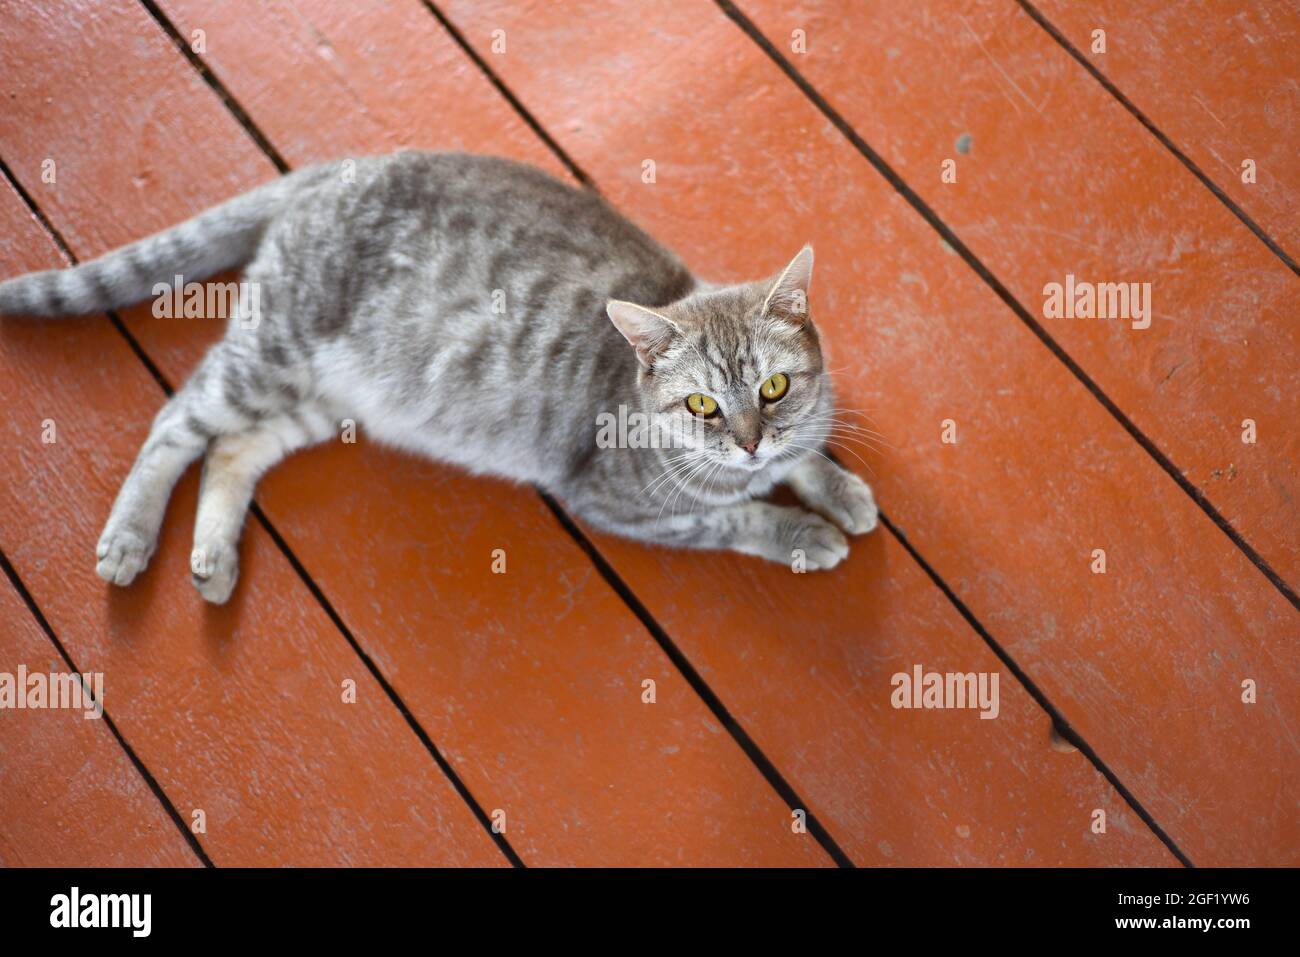 Pregnant gray cat before giving birth Stock Photo